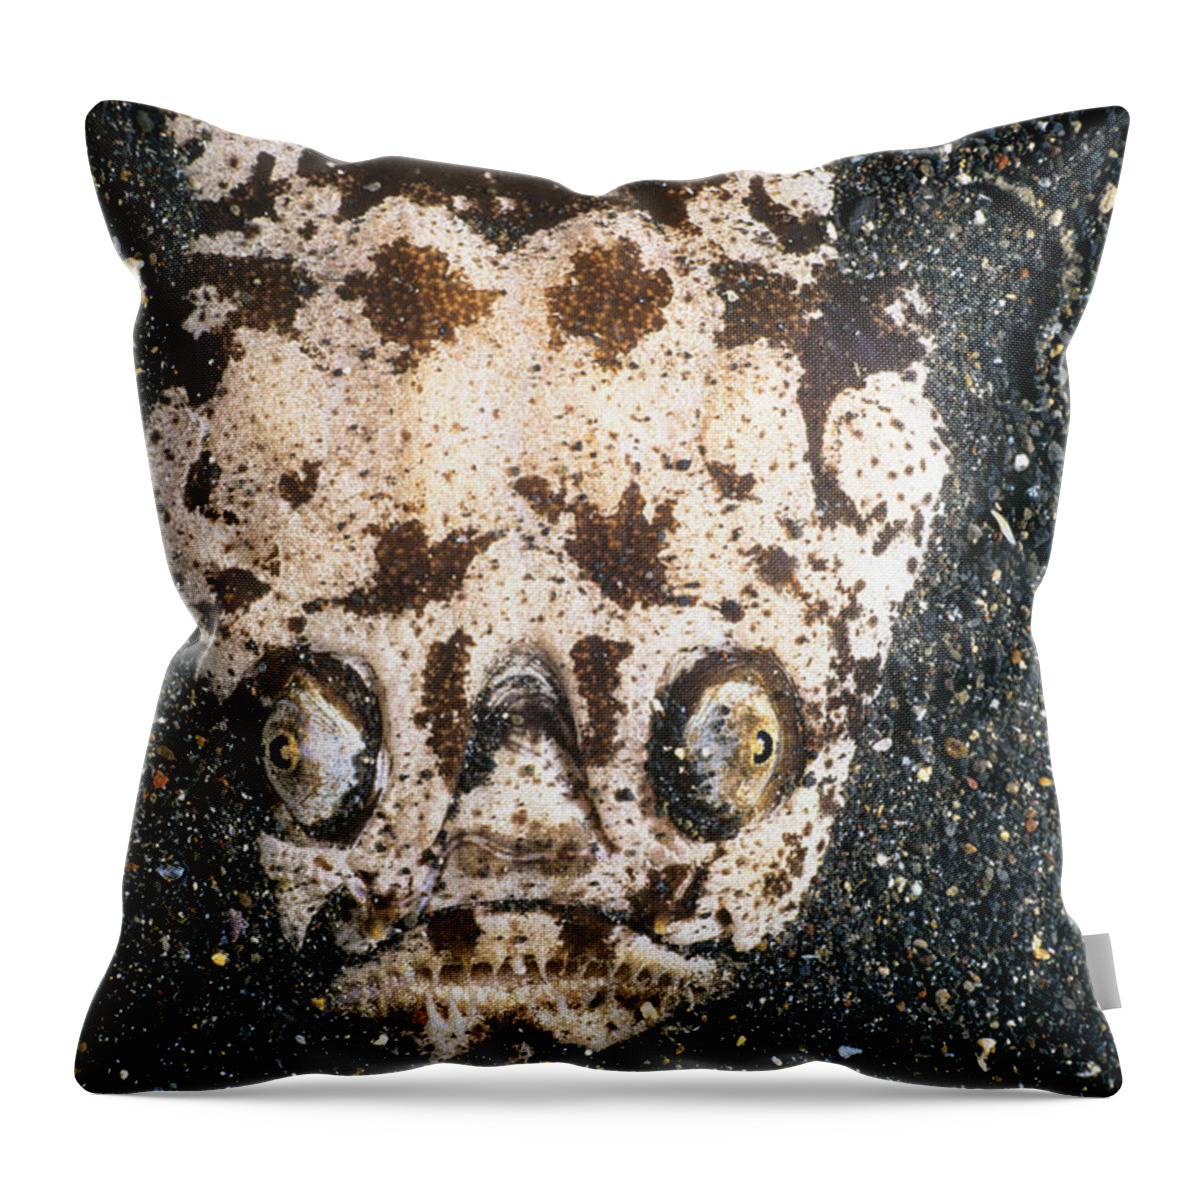 Marbled Stargazer Throw Pillow featuring the photograph Marbled Stargazer by Jeff Rotman